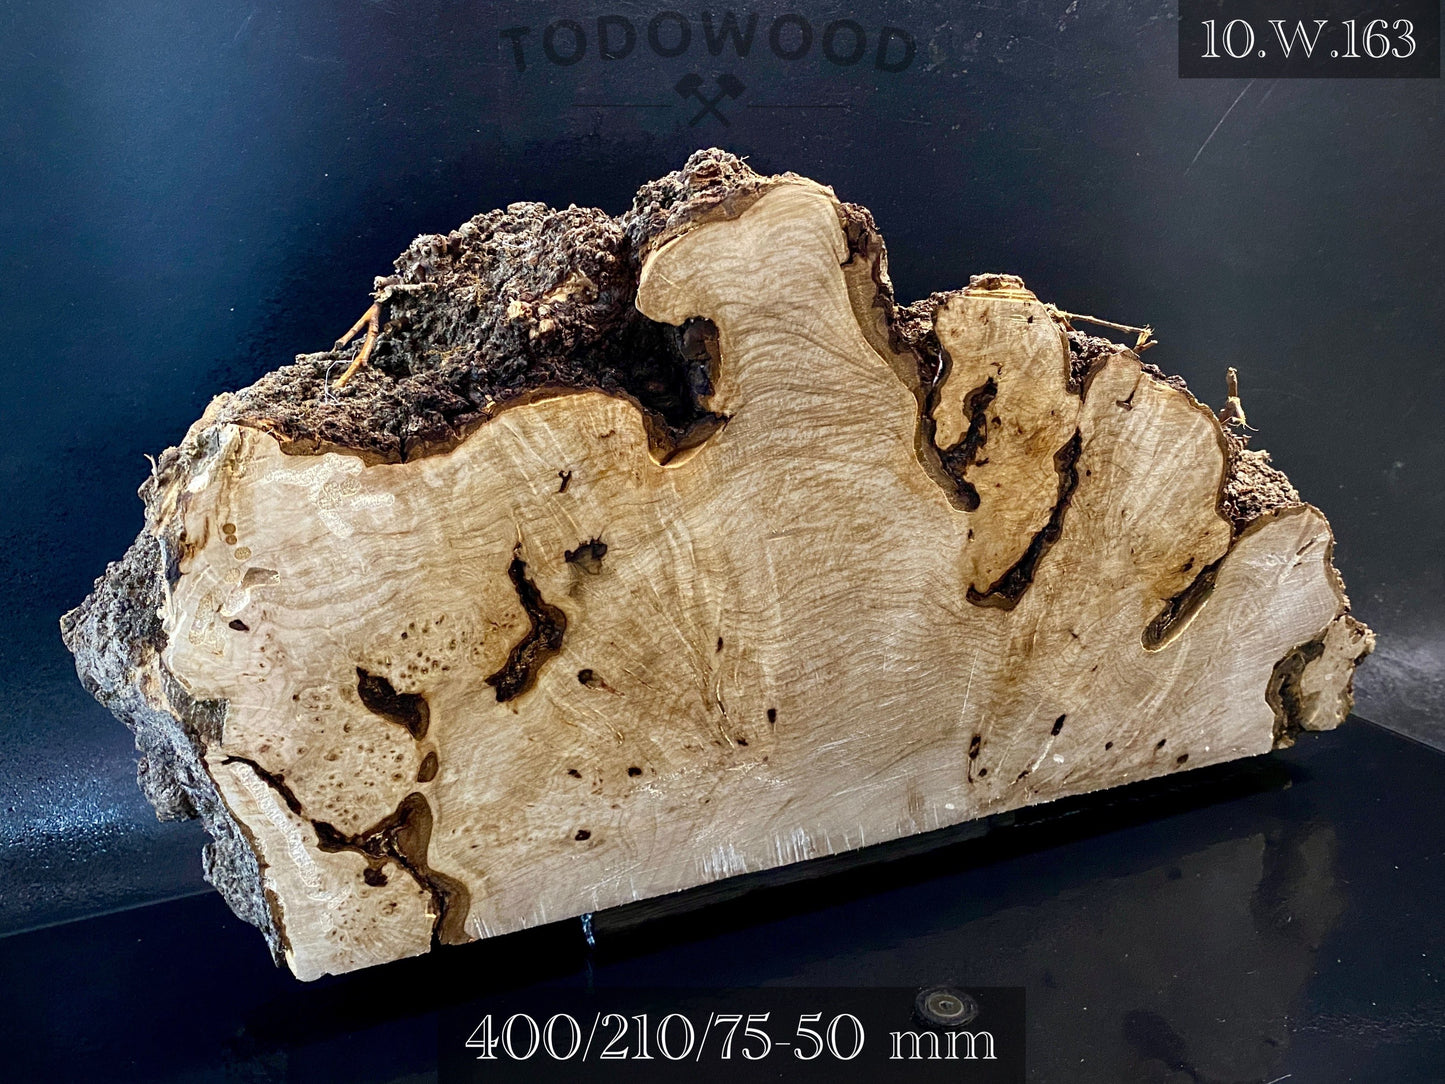 WALNUT BURL Wood Very Rare, Blank for woodworking, turning. France Stock. #W.163